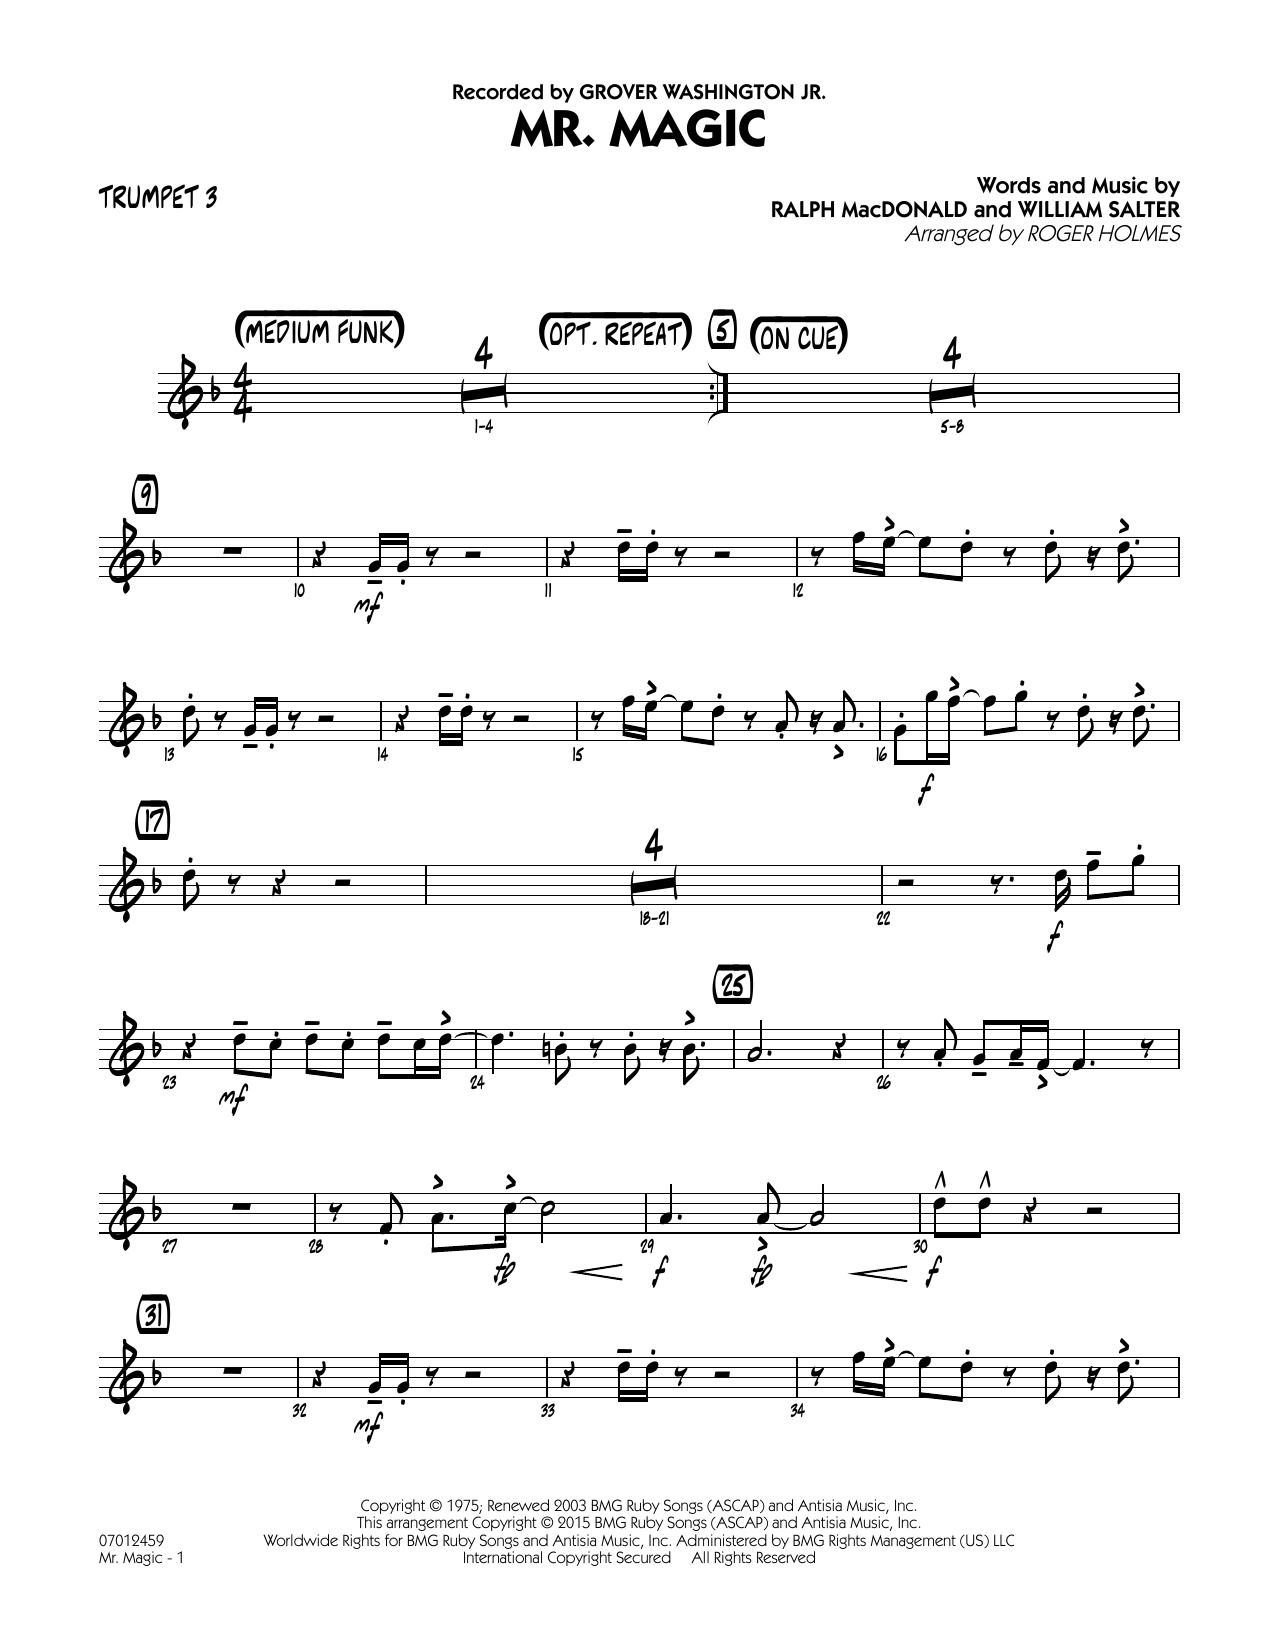 Roger Holmes Mister Magic (Mr. Magic) - Trumpet 3 sheet music notes and chords. Download Printable PDF.